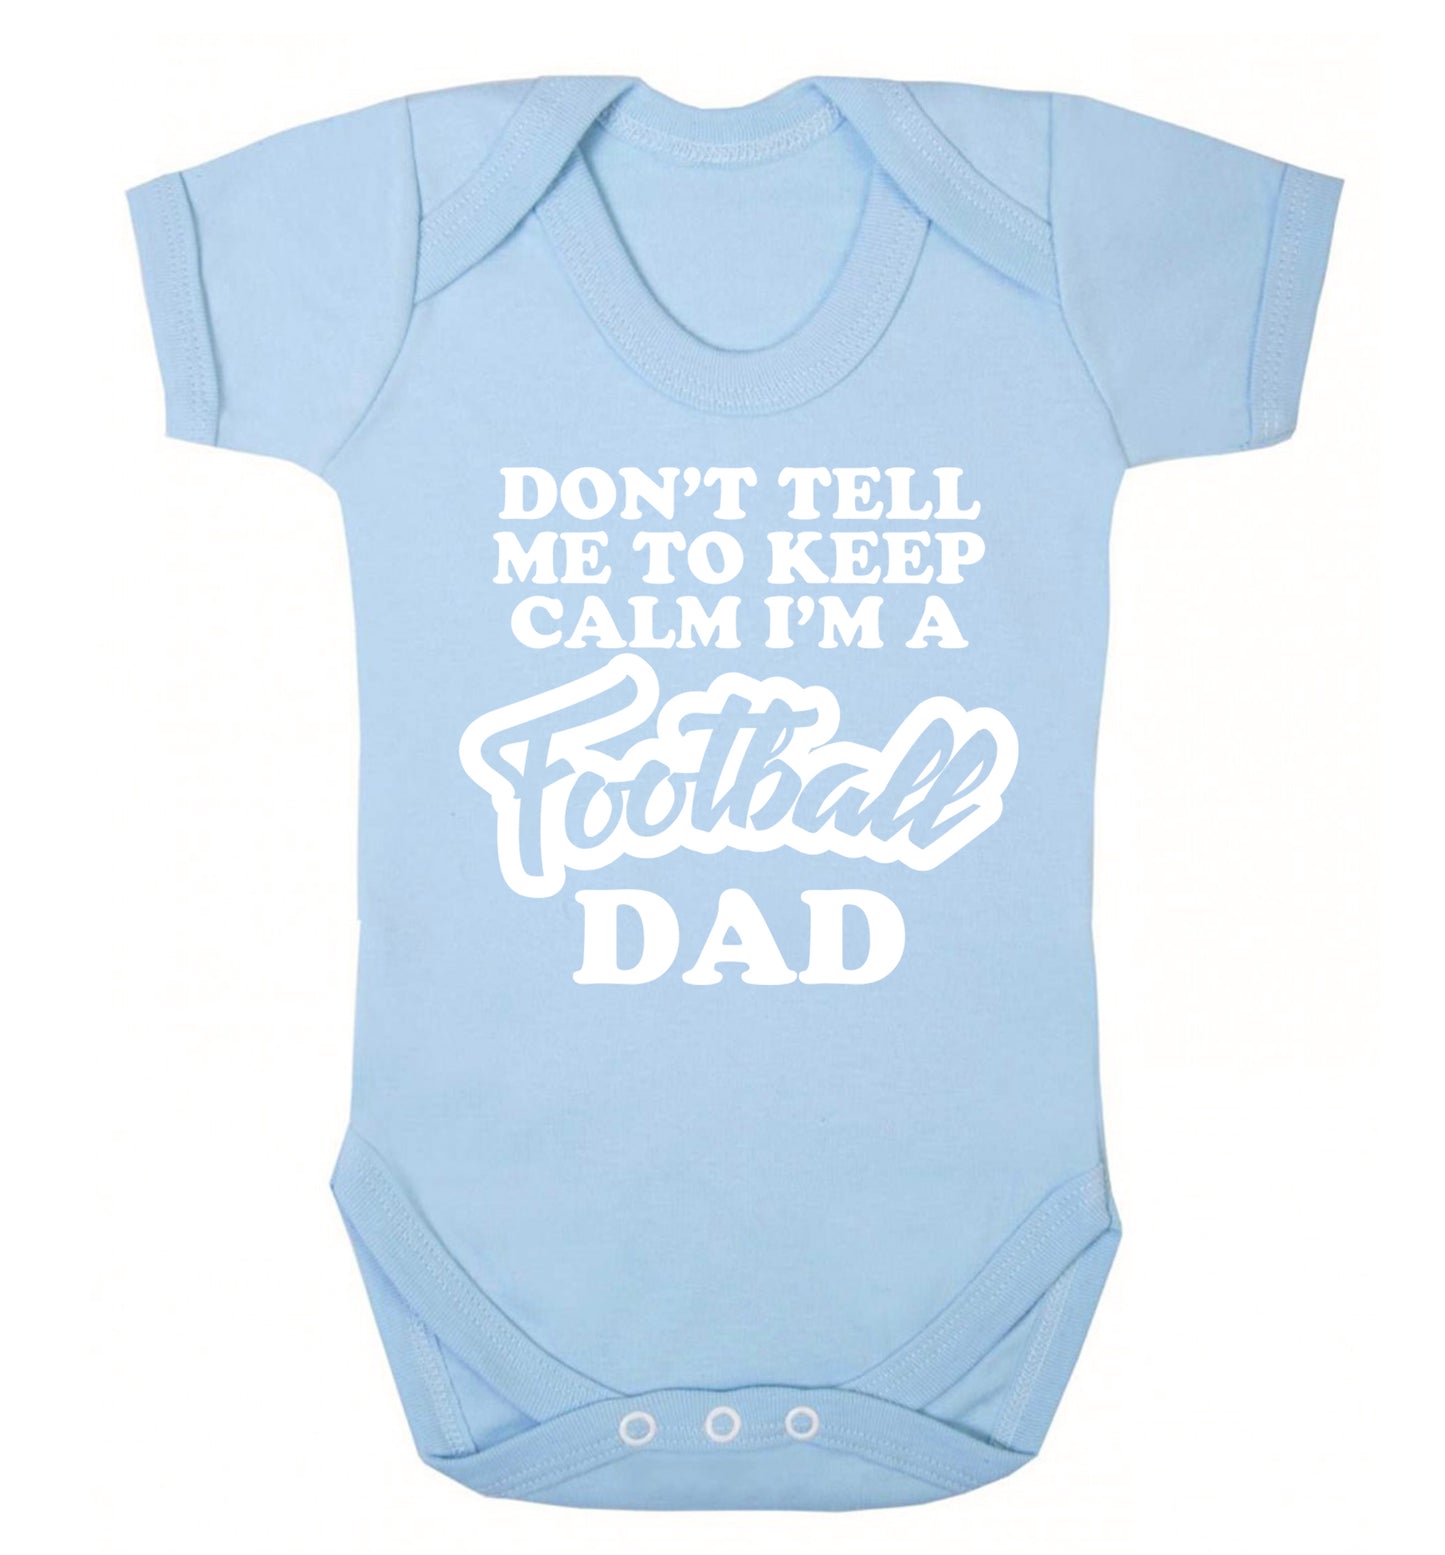 Don't tell me to keep calm I'm a football dad Baby Vest pale blue 18-24 months